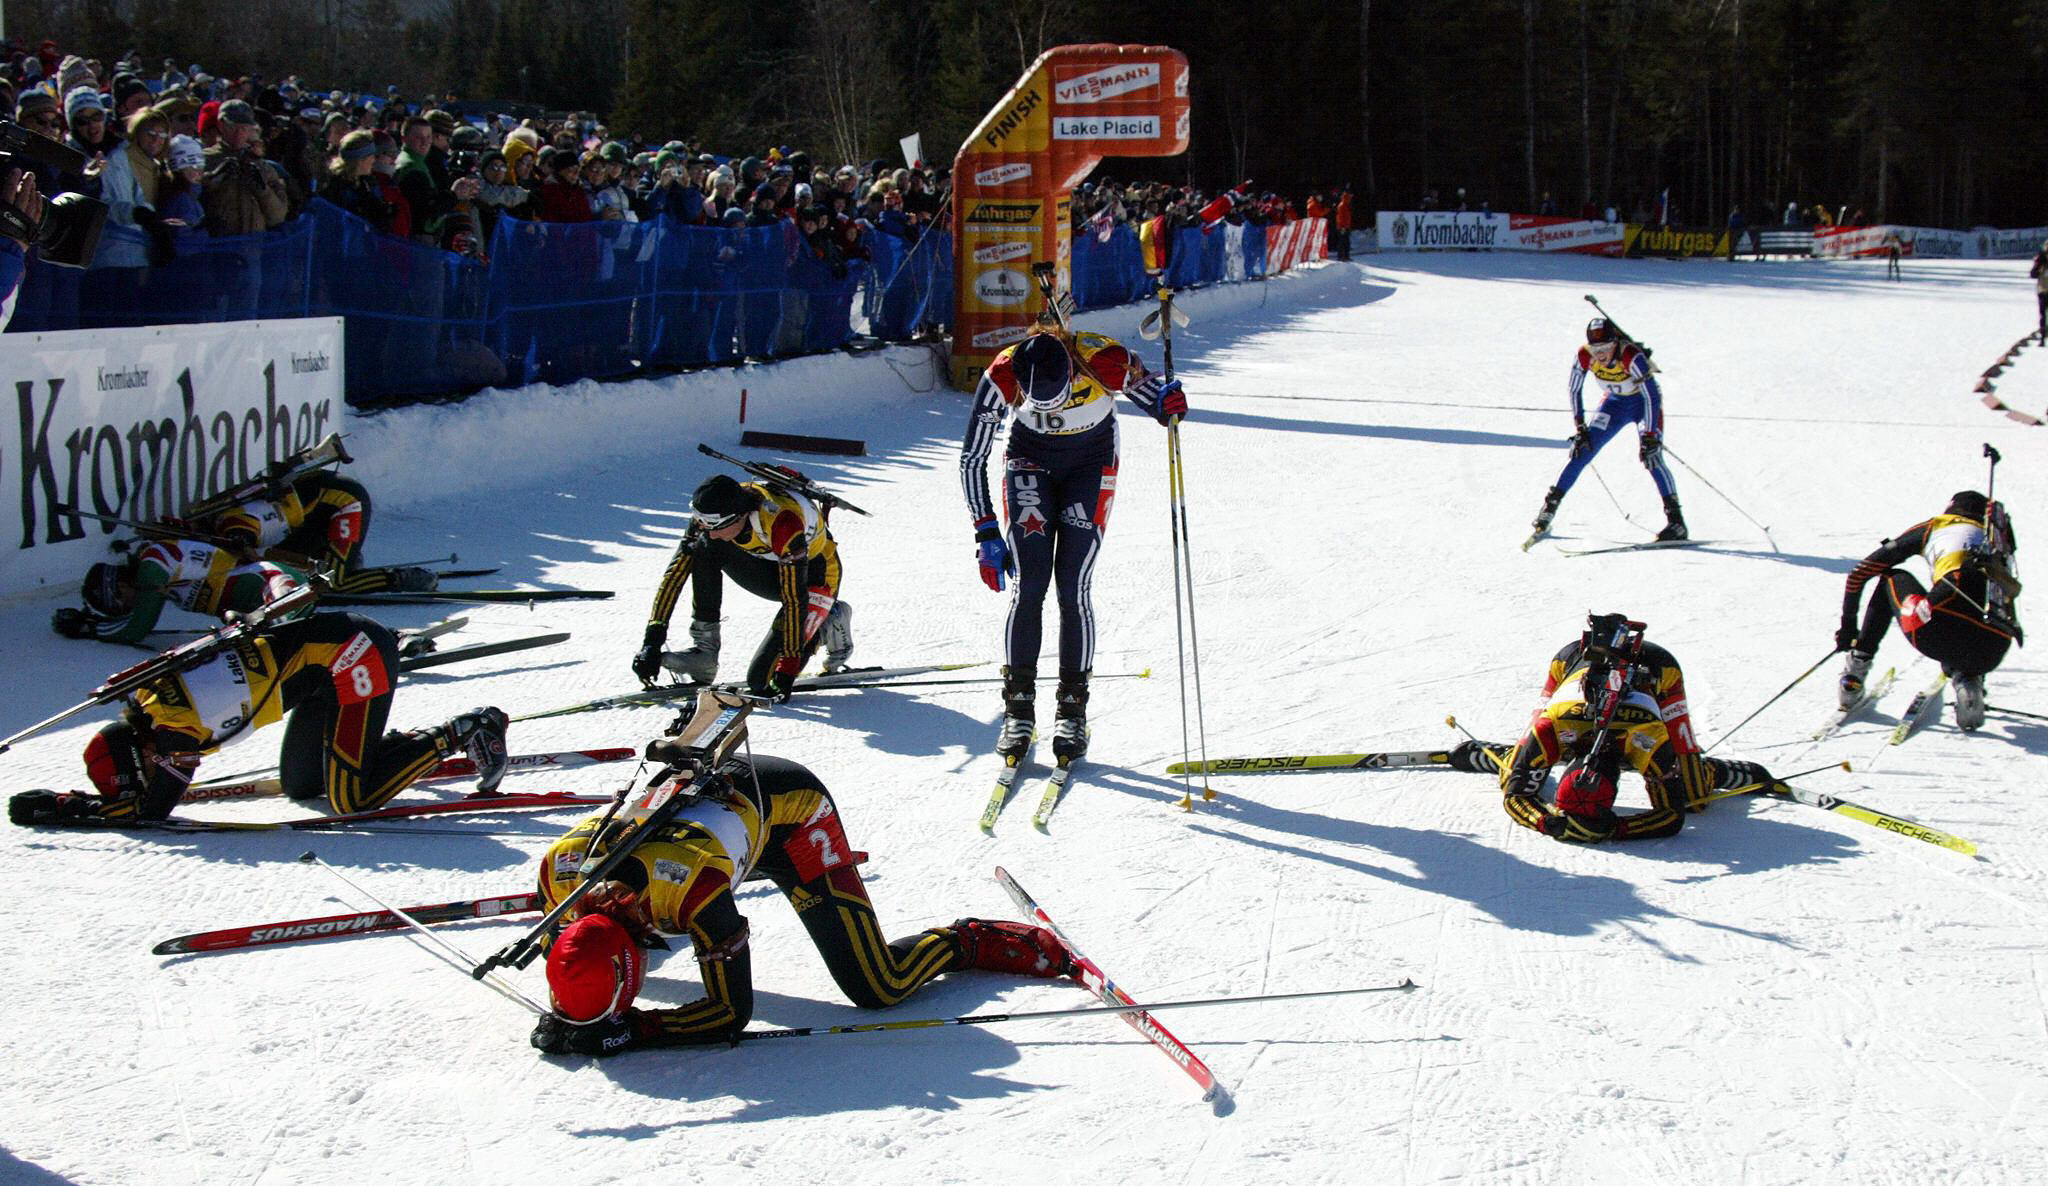 Lake Placid staged a Biathlon World Cup leg during the 2003-2004 season ©Getty Images